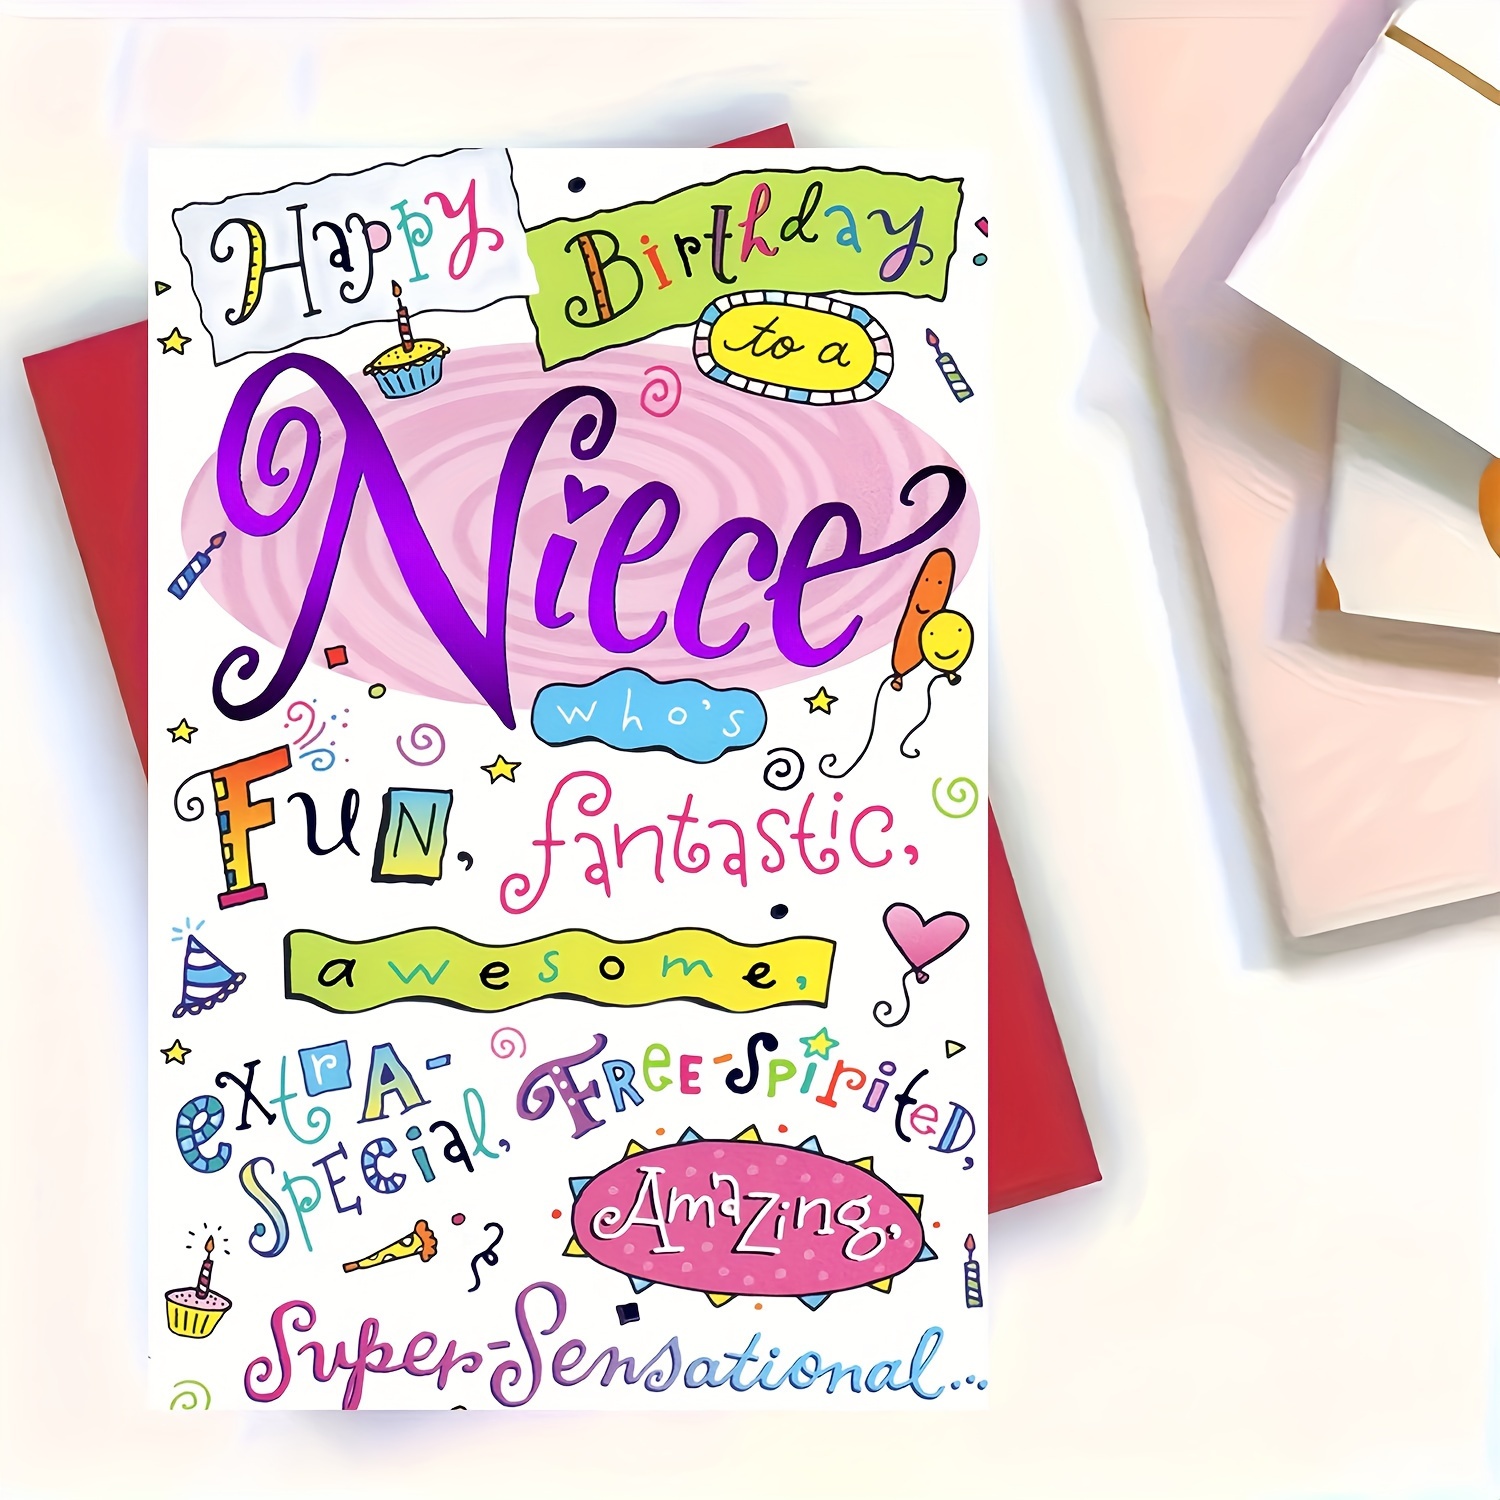 

Charming Birthday Card For Niece - Perfect For Family, Unique Small Business Thank You & Gift Idea, High-quality Paper